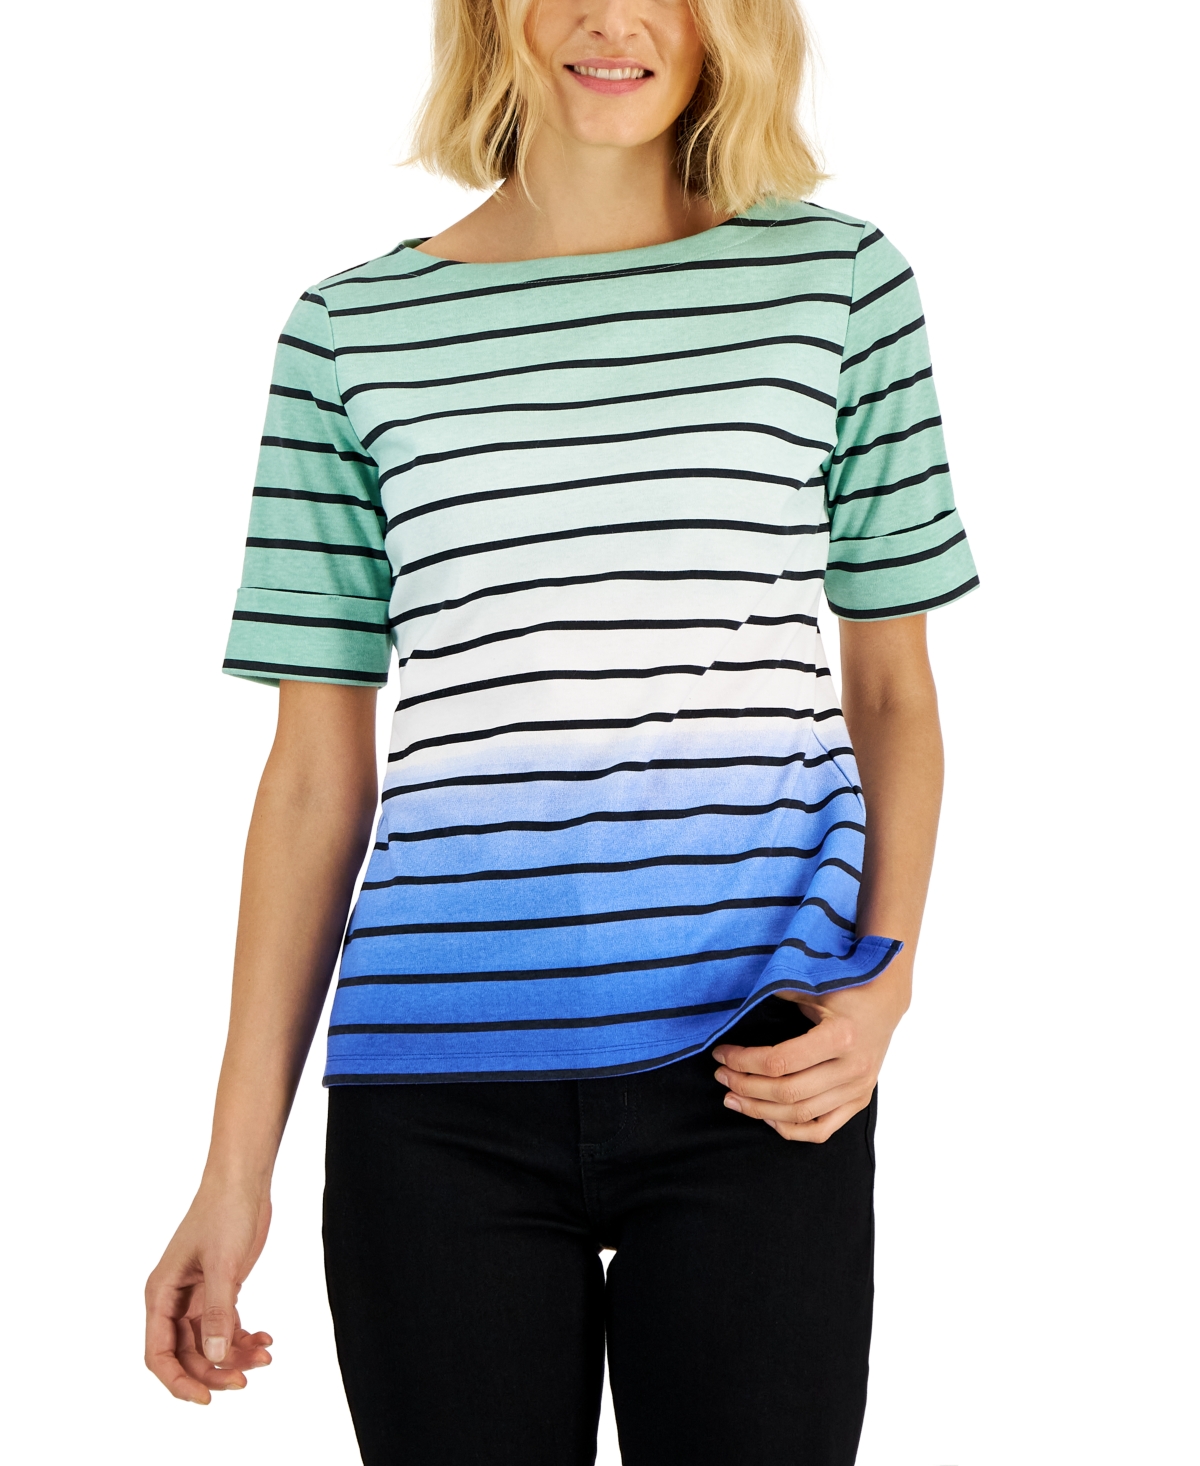 Women's Striped Ombre Short-Sleeve Top, Created for Macy's - Steel Rose